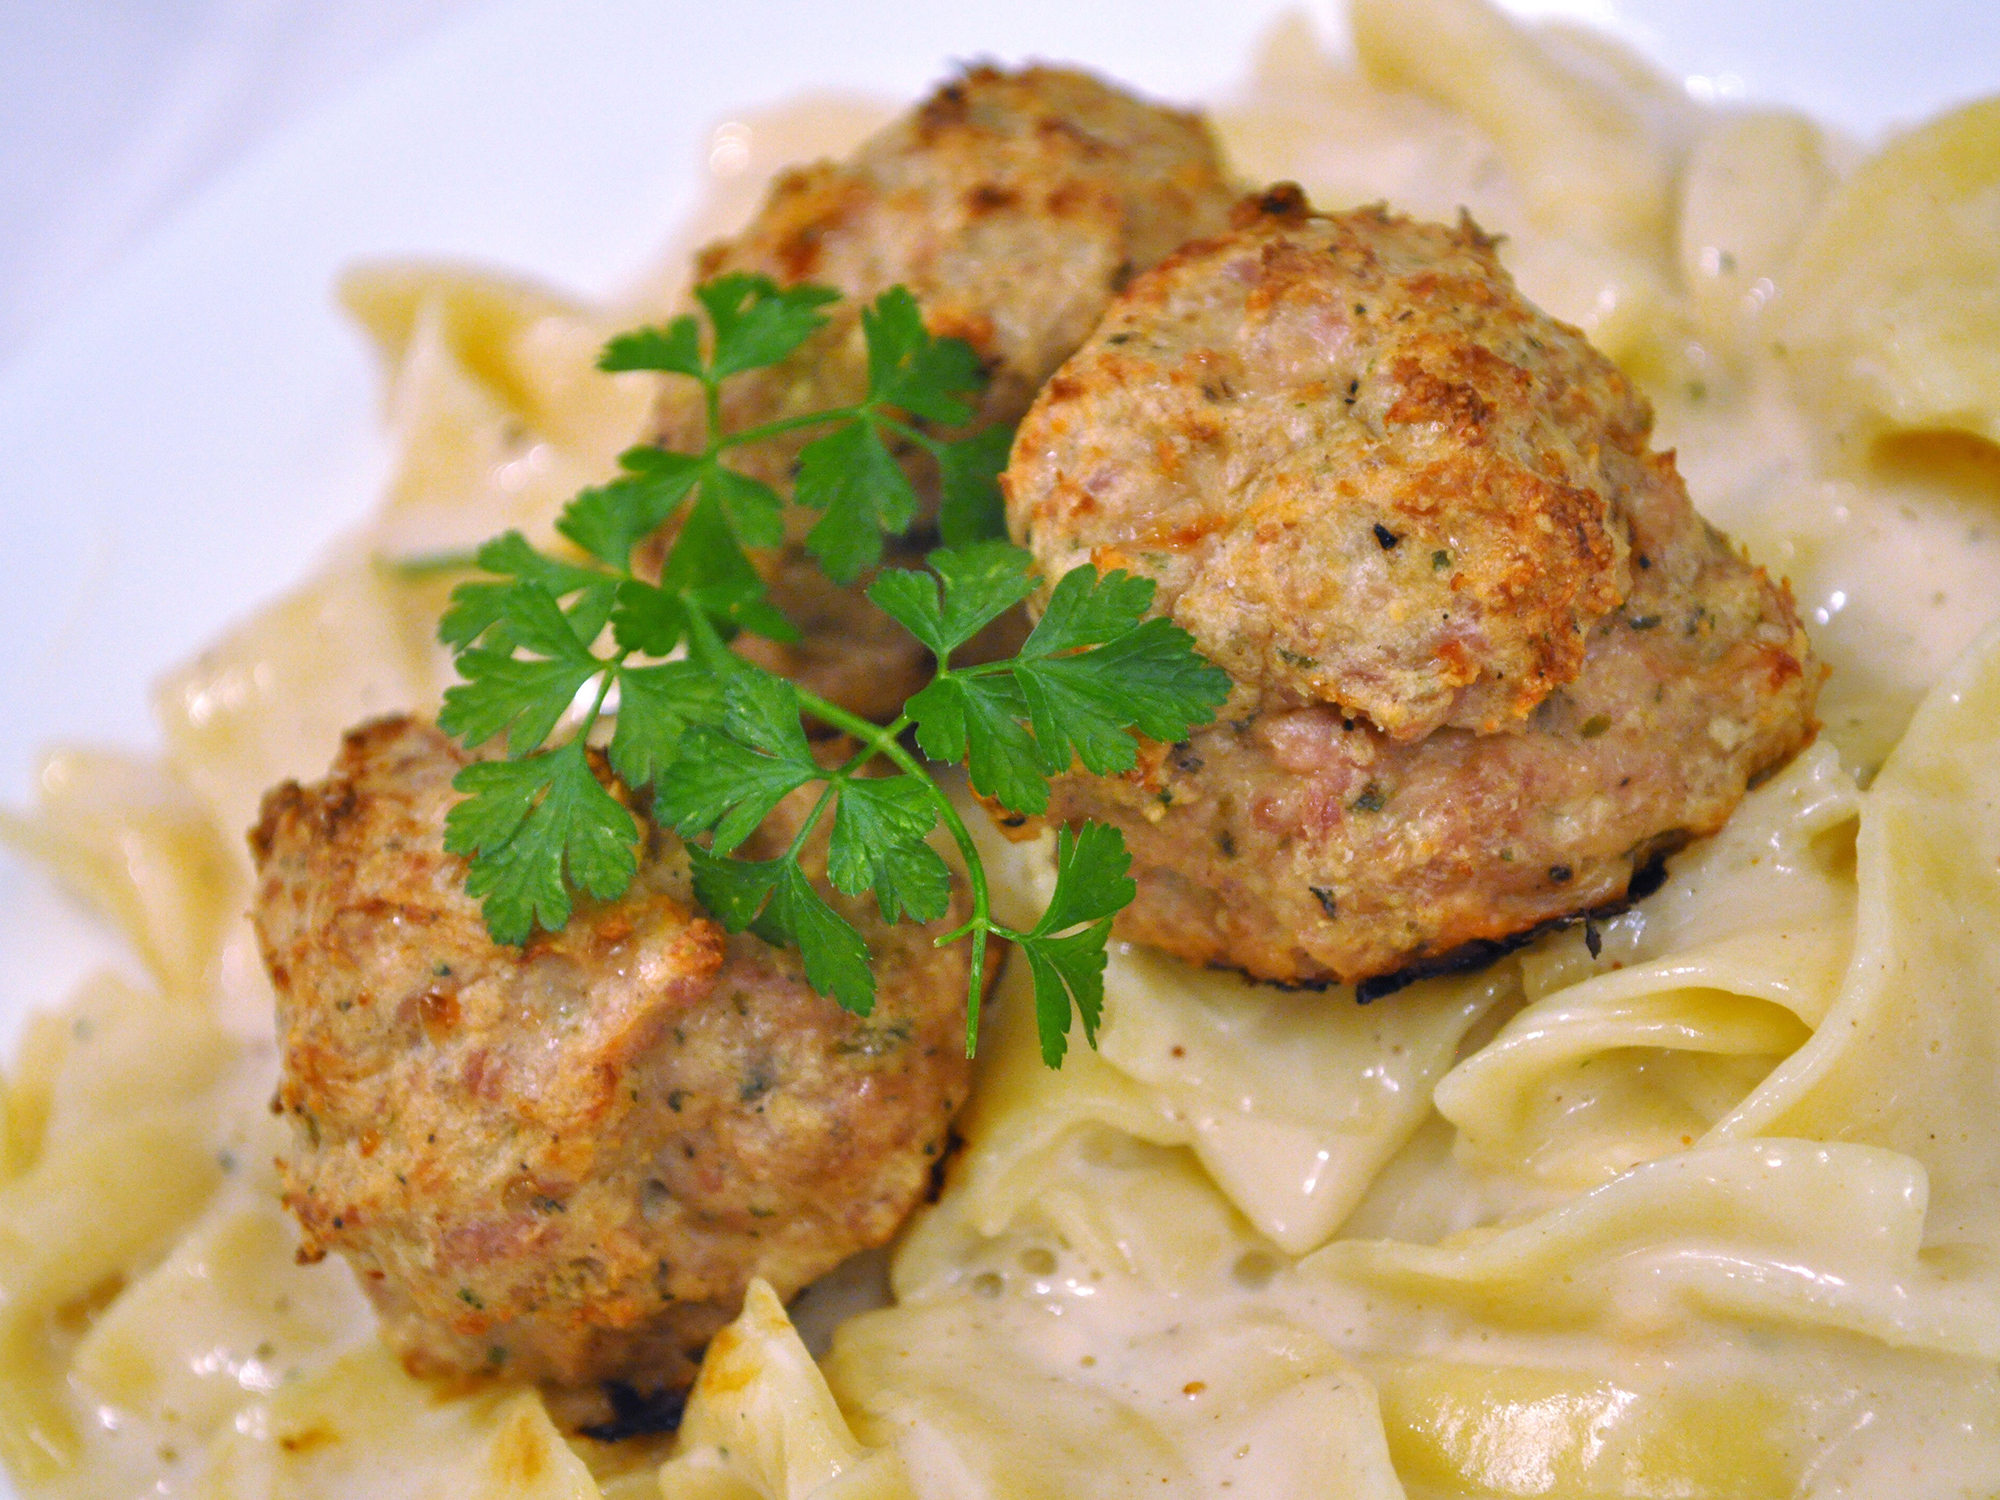 close up view of Cheesy Chicken Meatballs garnished with fresh herbs over pasta on a plate